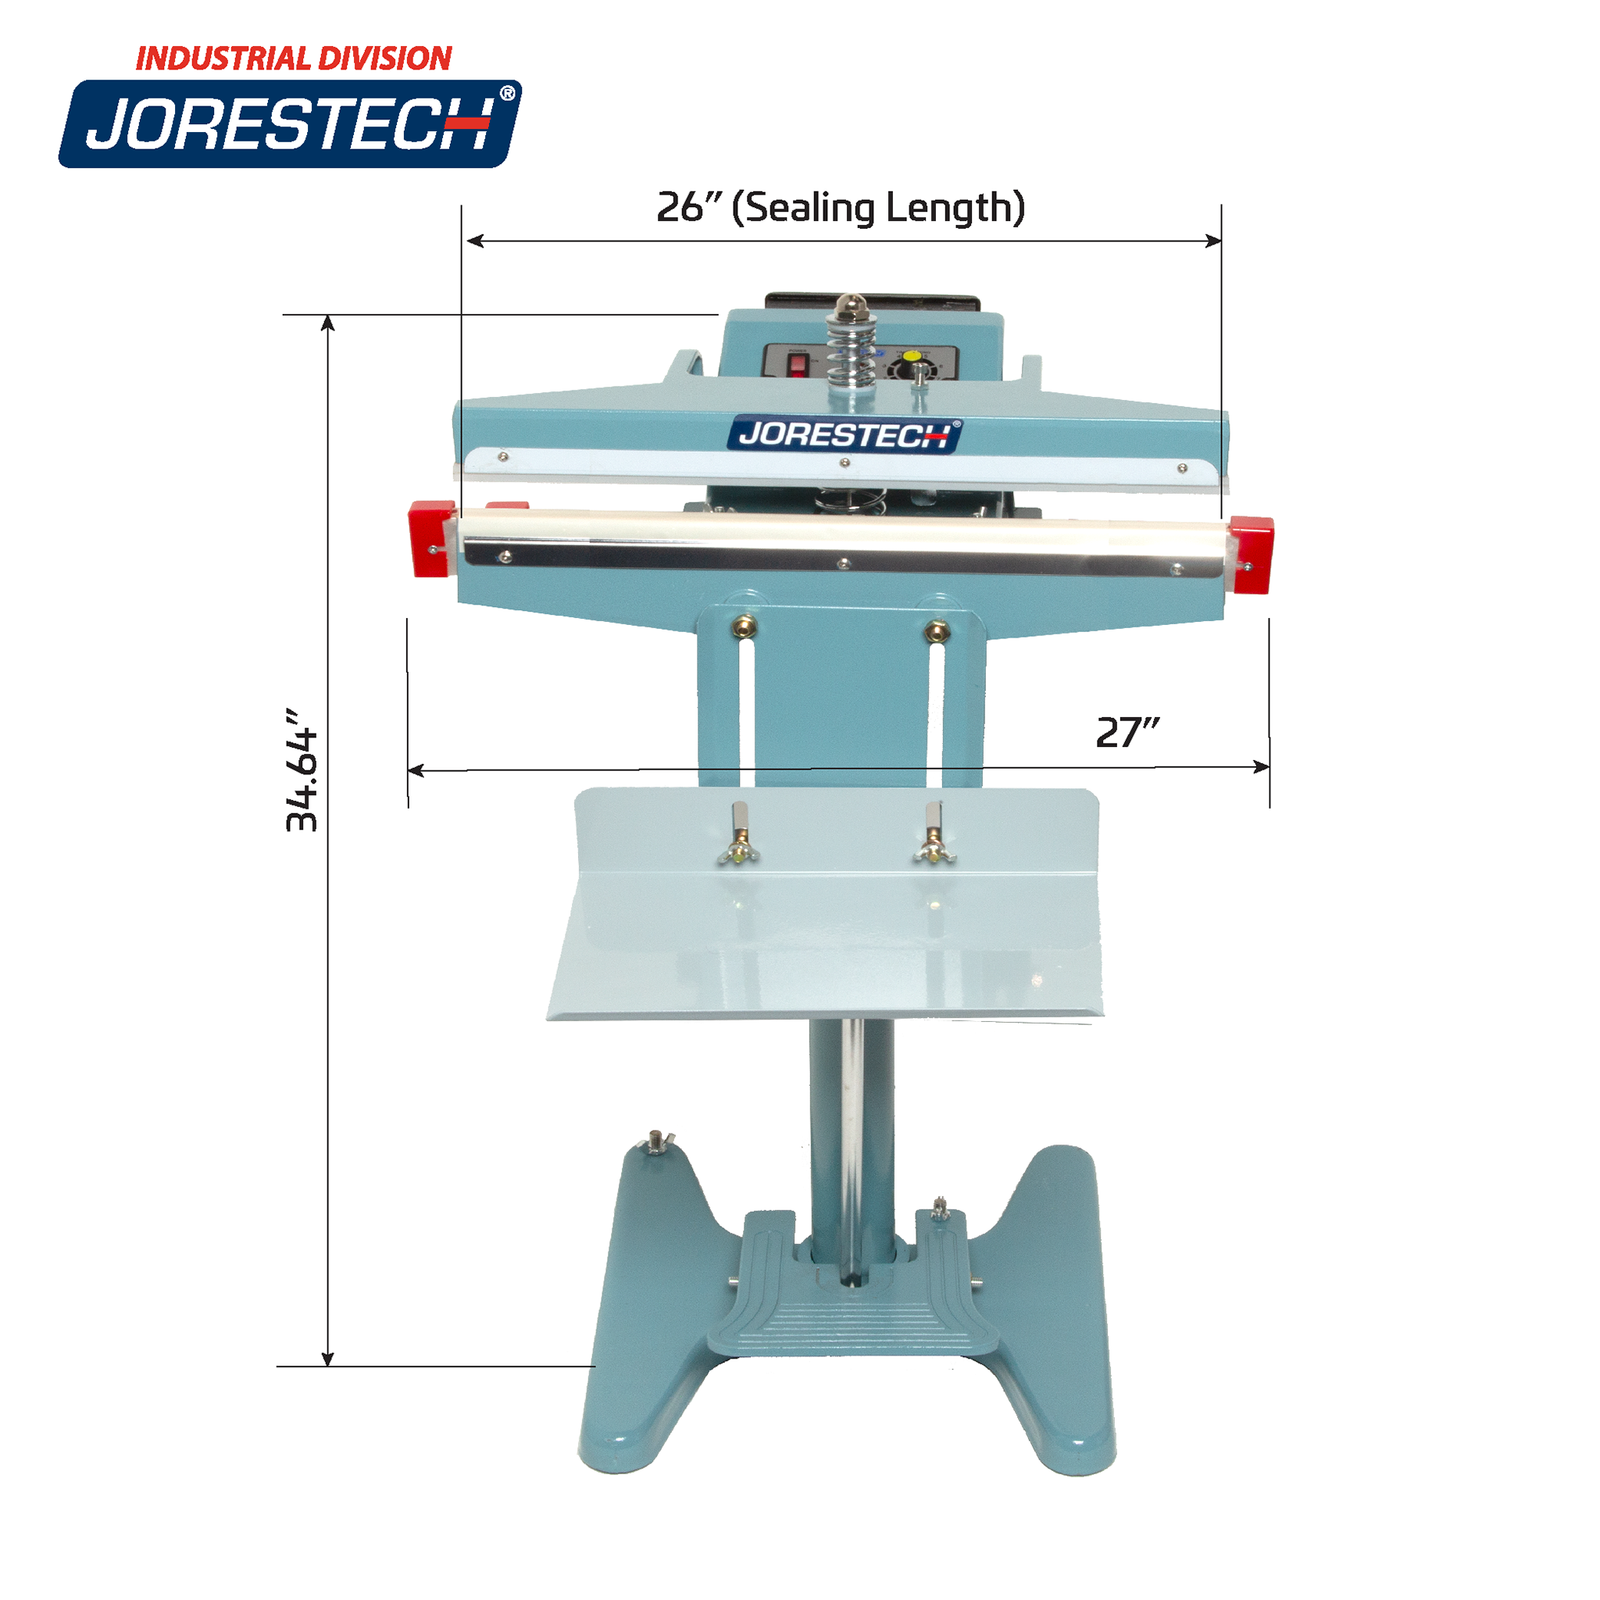 Infographic shows the JORES TECHNOLOGIES® foot impulse sealer with machine measurements. Machine measurements are 27